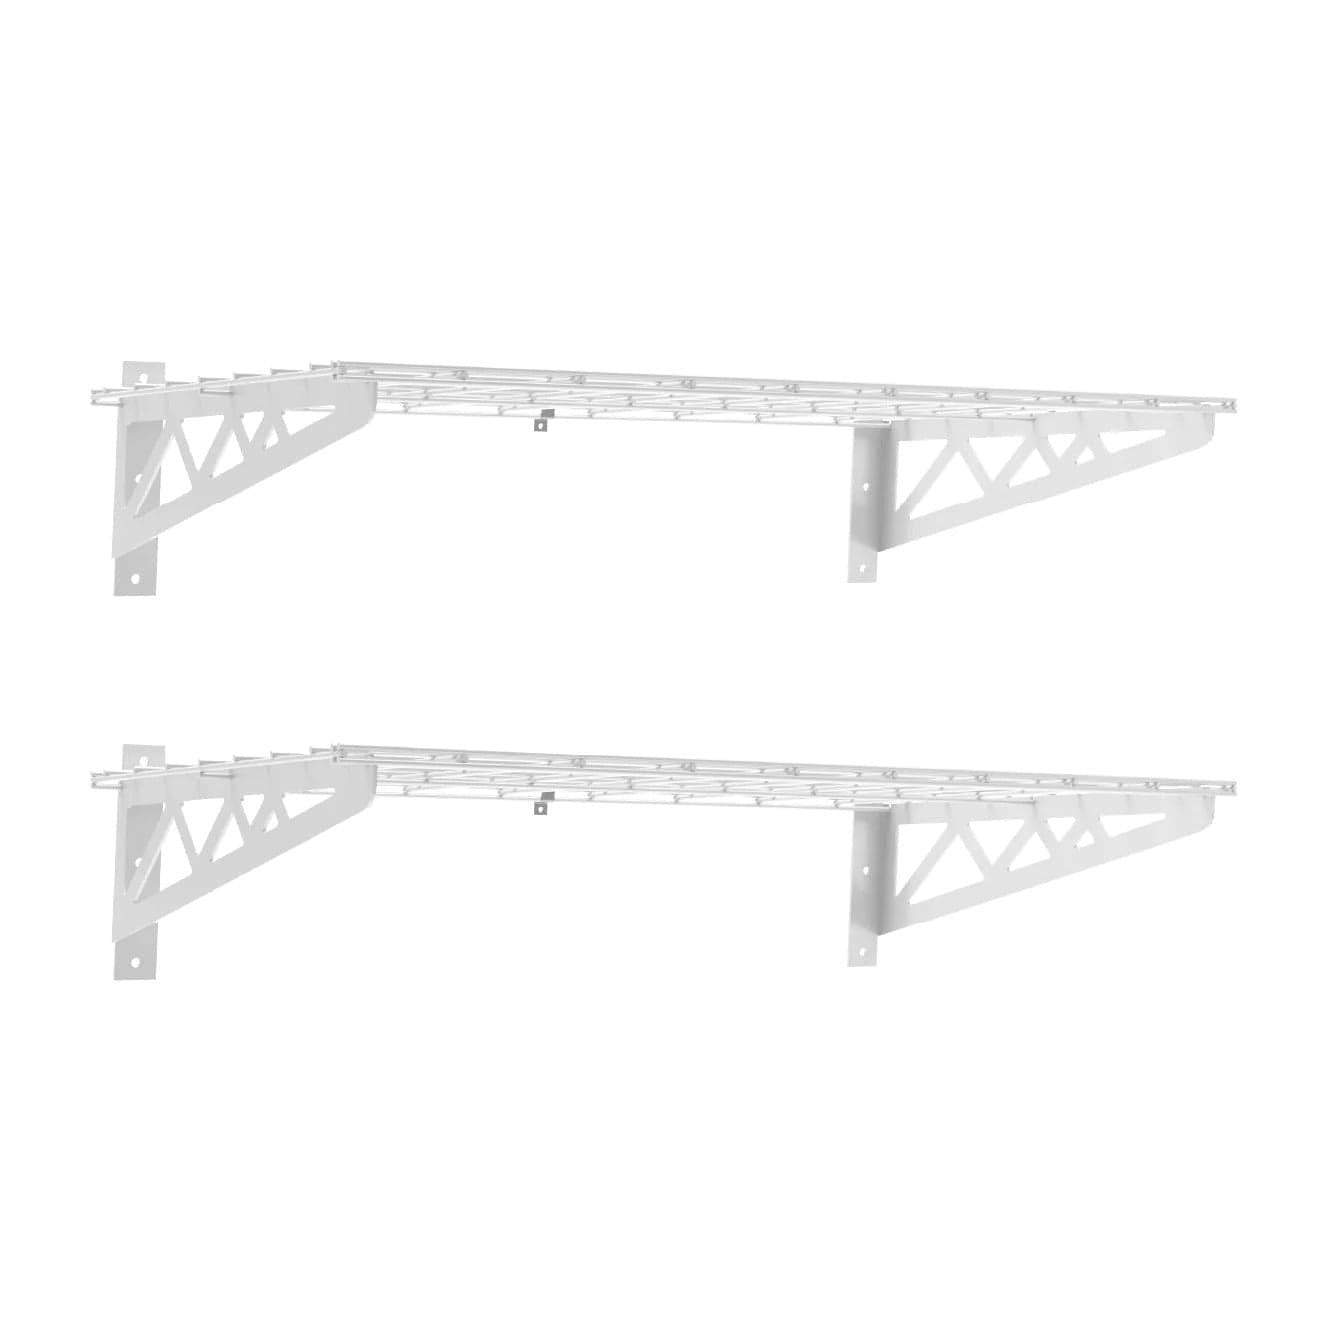 SafeRacks Heavy-Duty Garage Wall Shelves 18" x 36" | Two Pack with Hooks